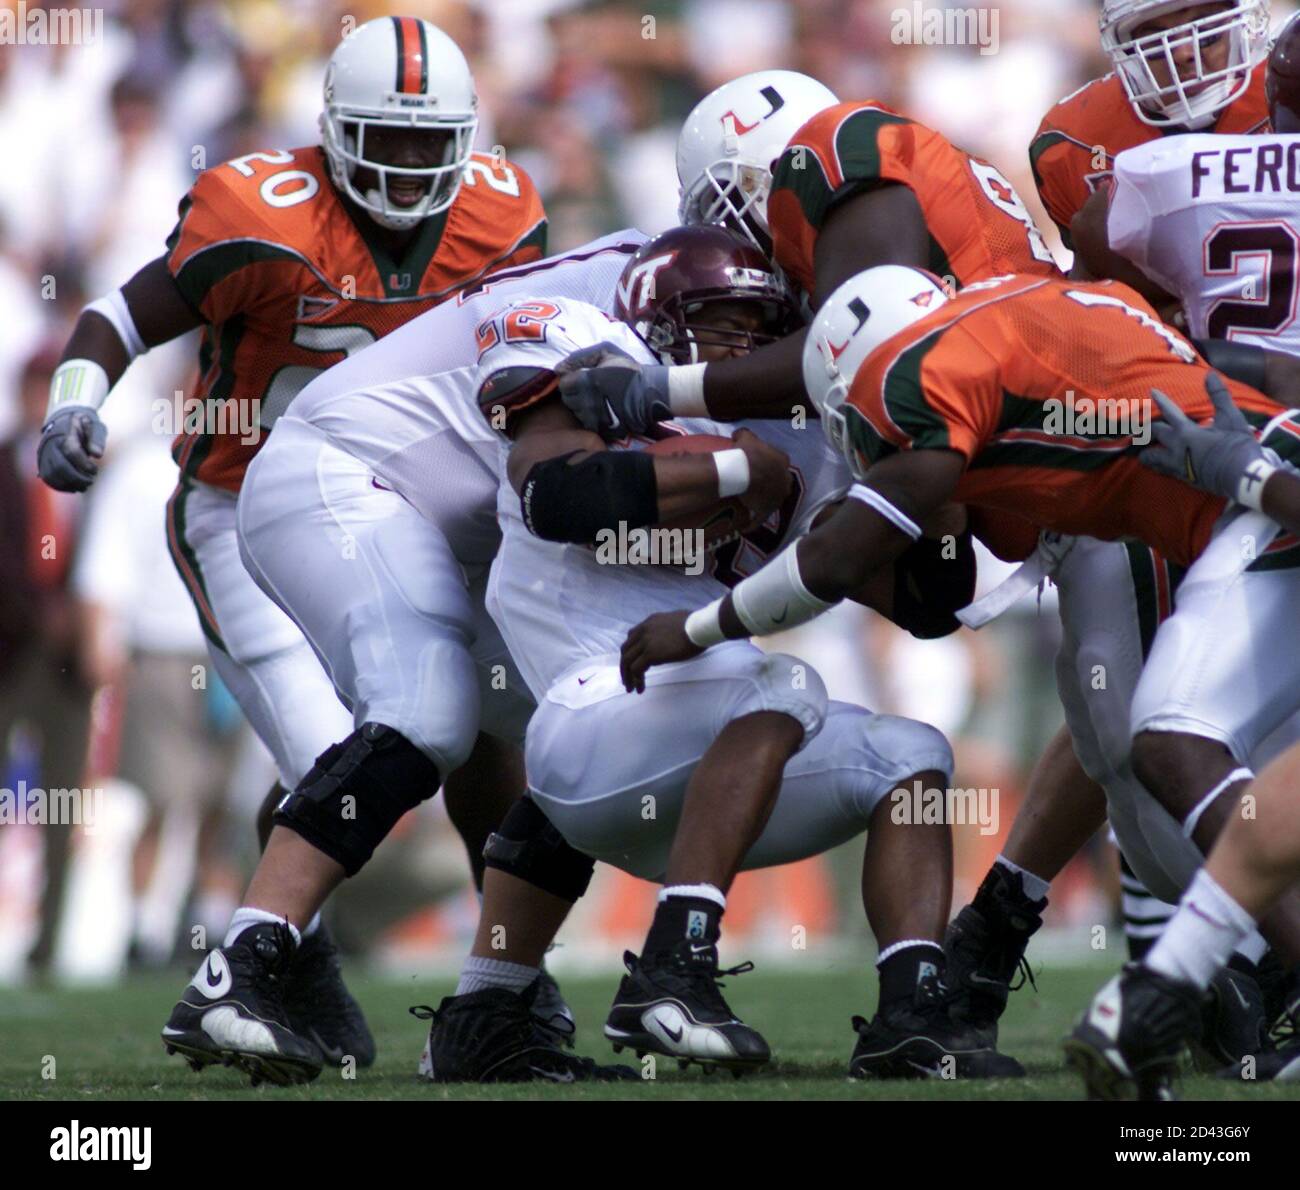 Miami Hurricanes defensive stops Virginia Tech running back Lee Suggs (C)  in the second quarter of play a the Orange Bowl November 4, 2000. CB/JP  Stock Photo - Alamy